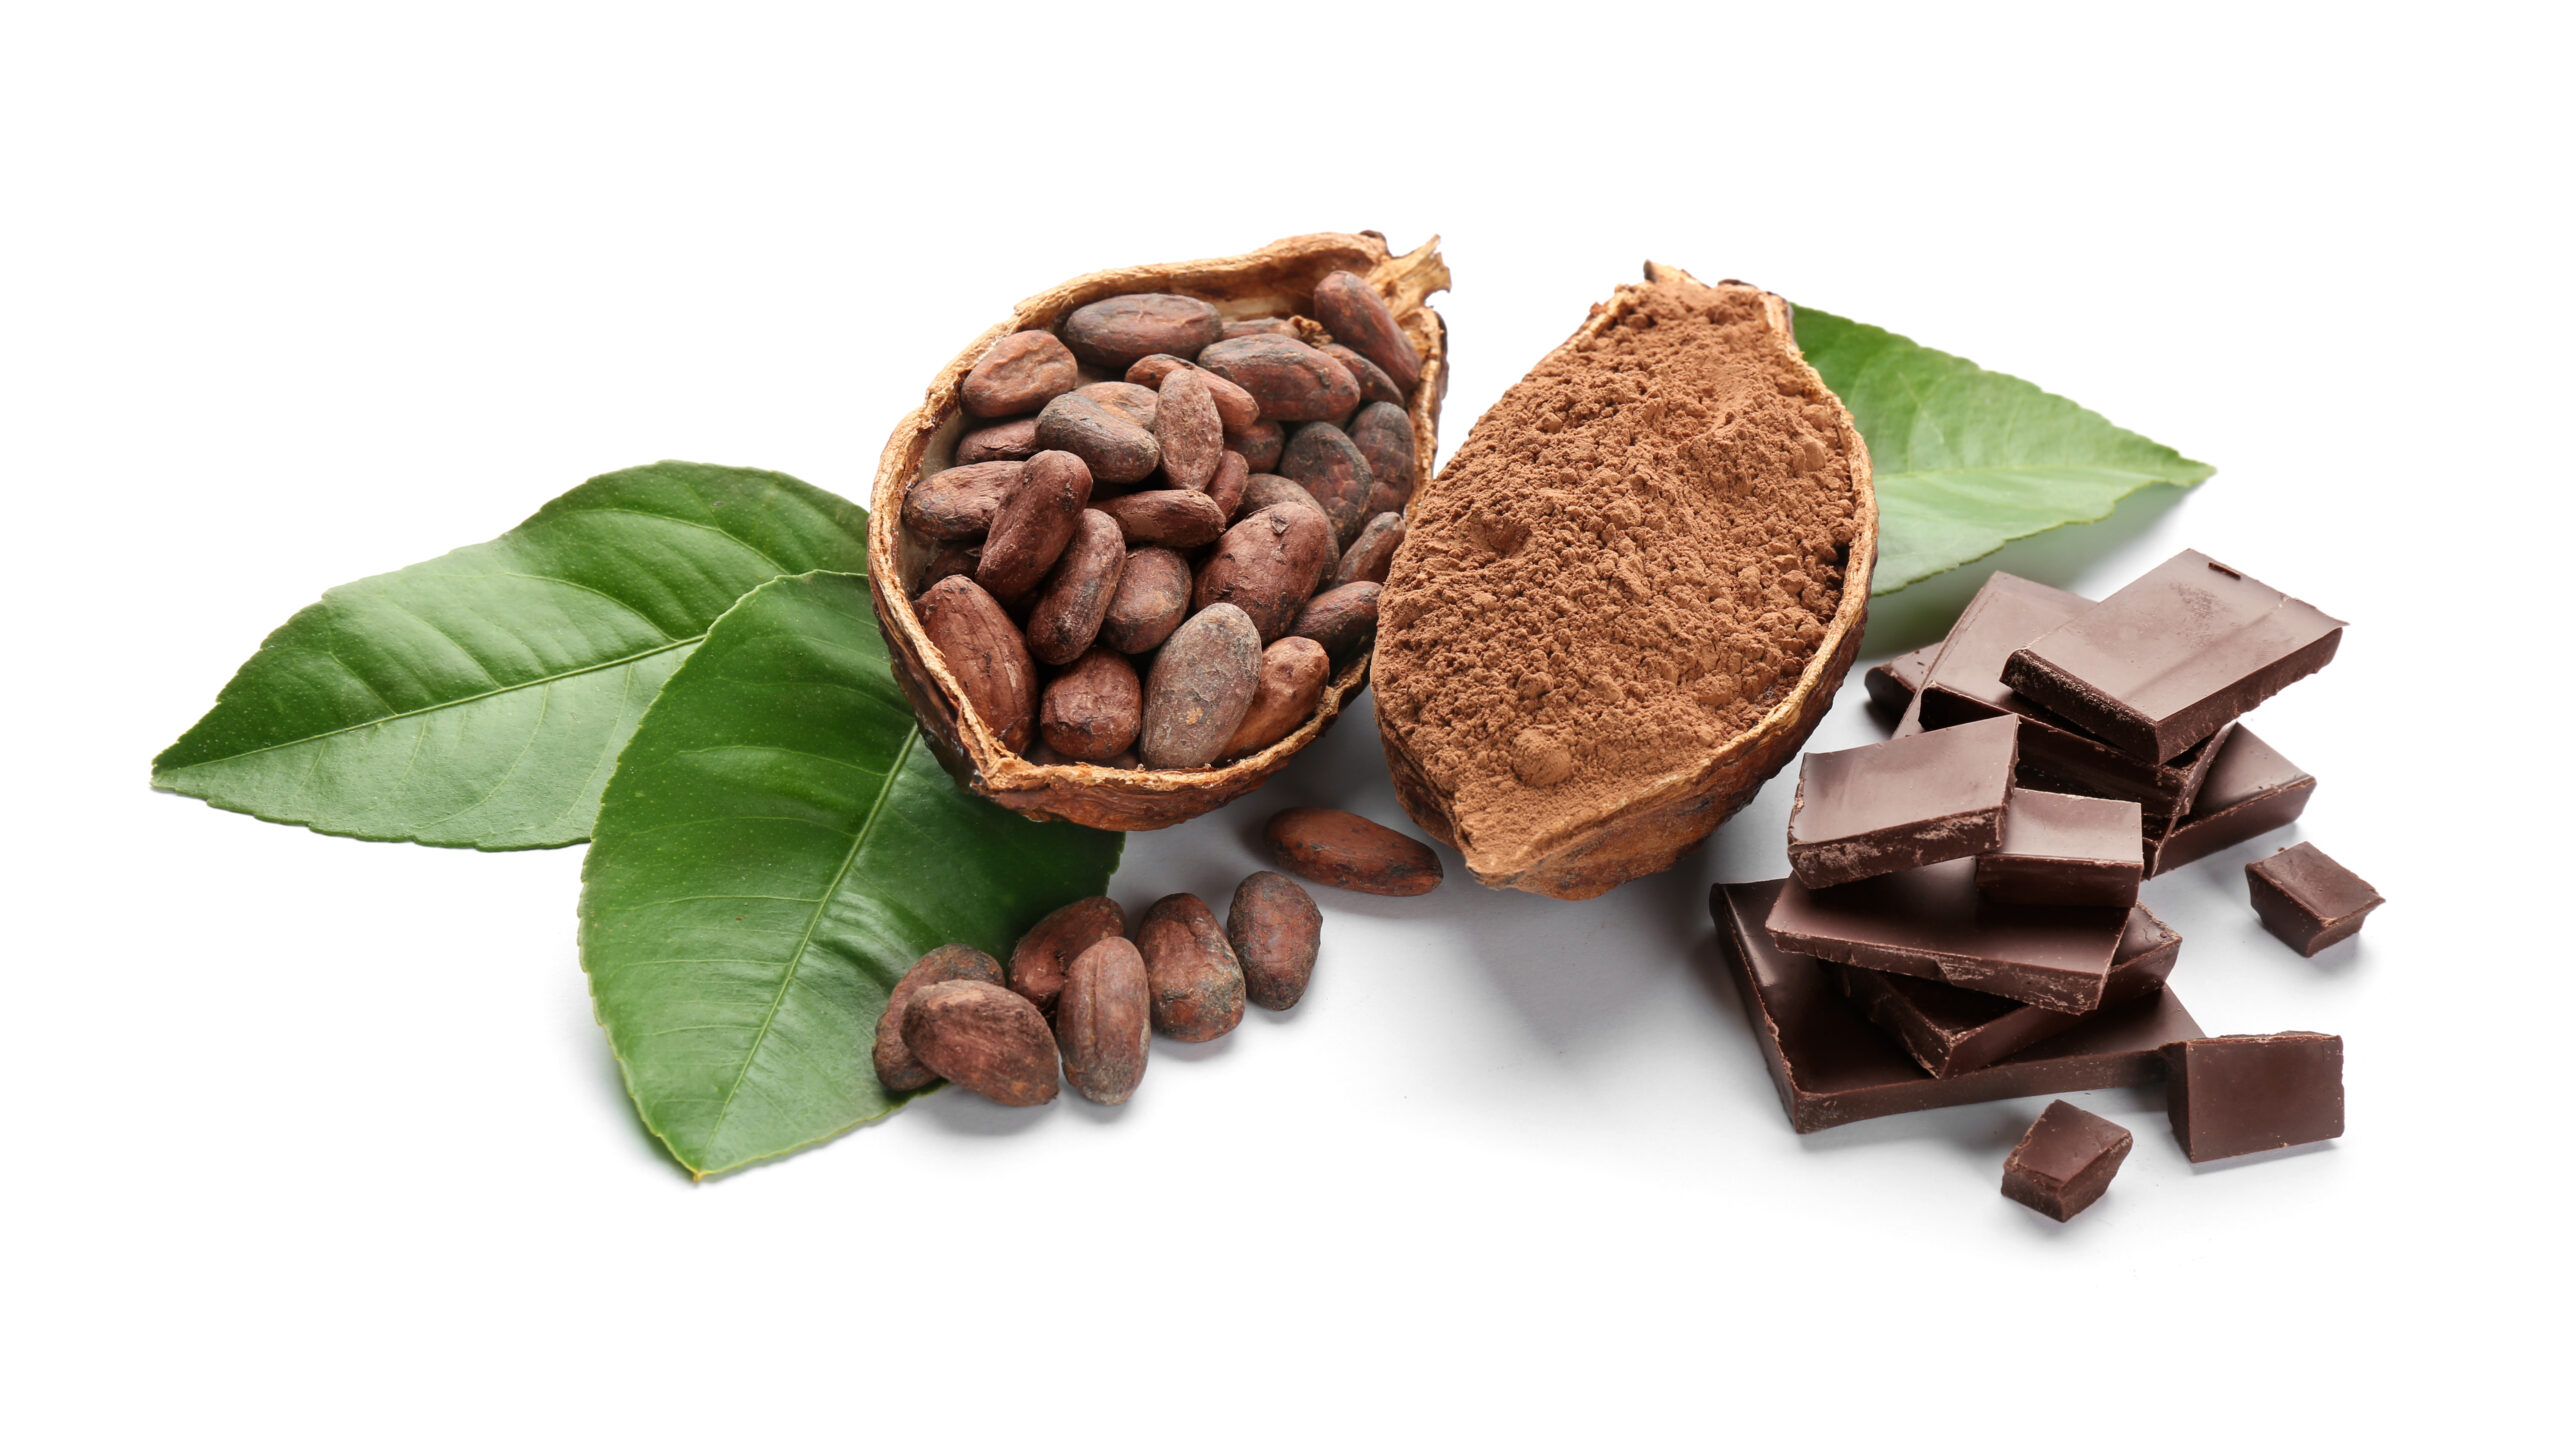 Cocoa Shown To Reduce Blood Pressure And Arterial Stiffness In First Real-Life Study